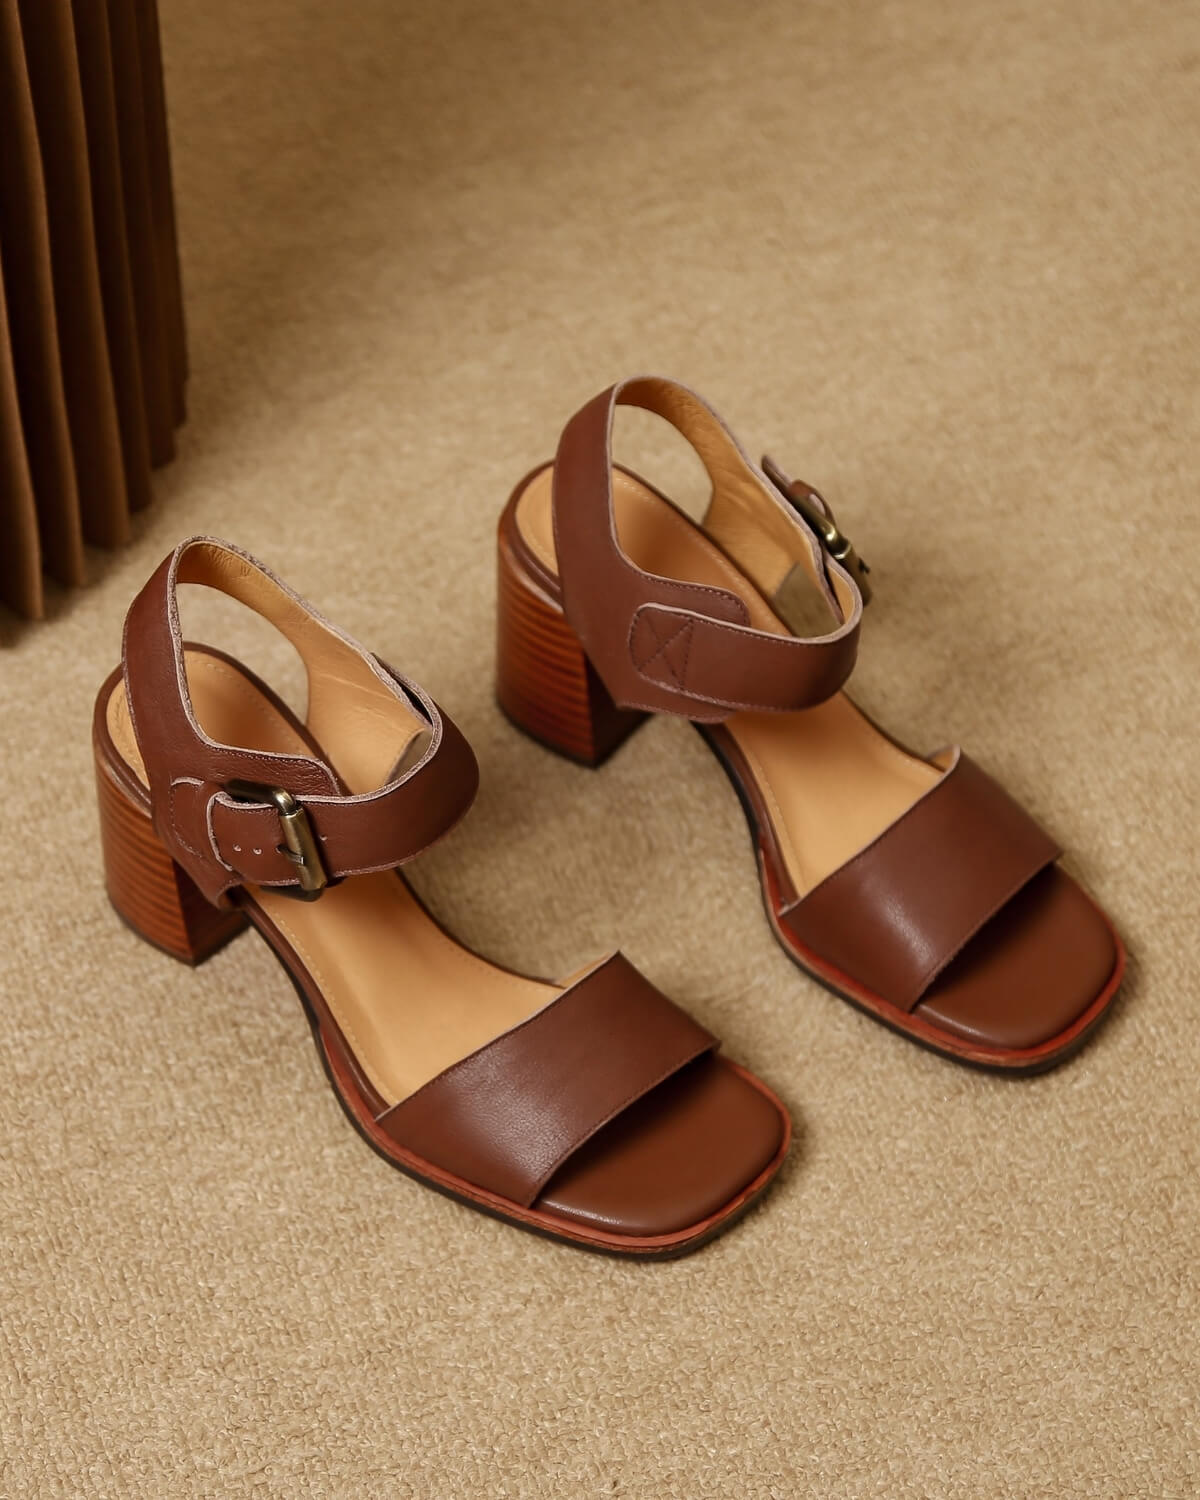 Santo-brown-leather-sandals-1